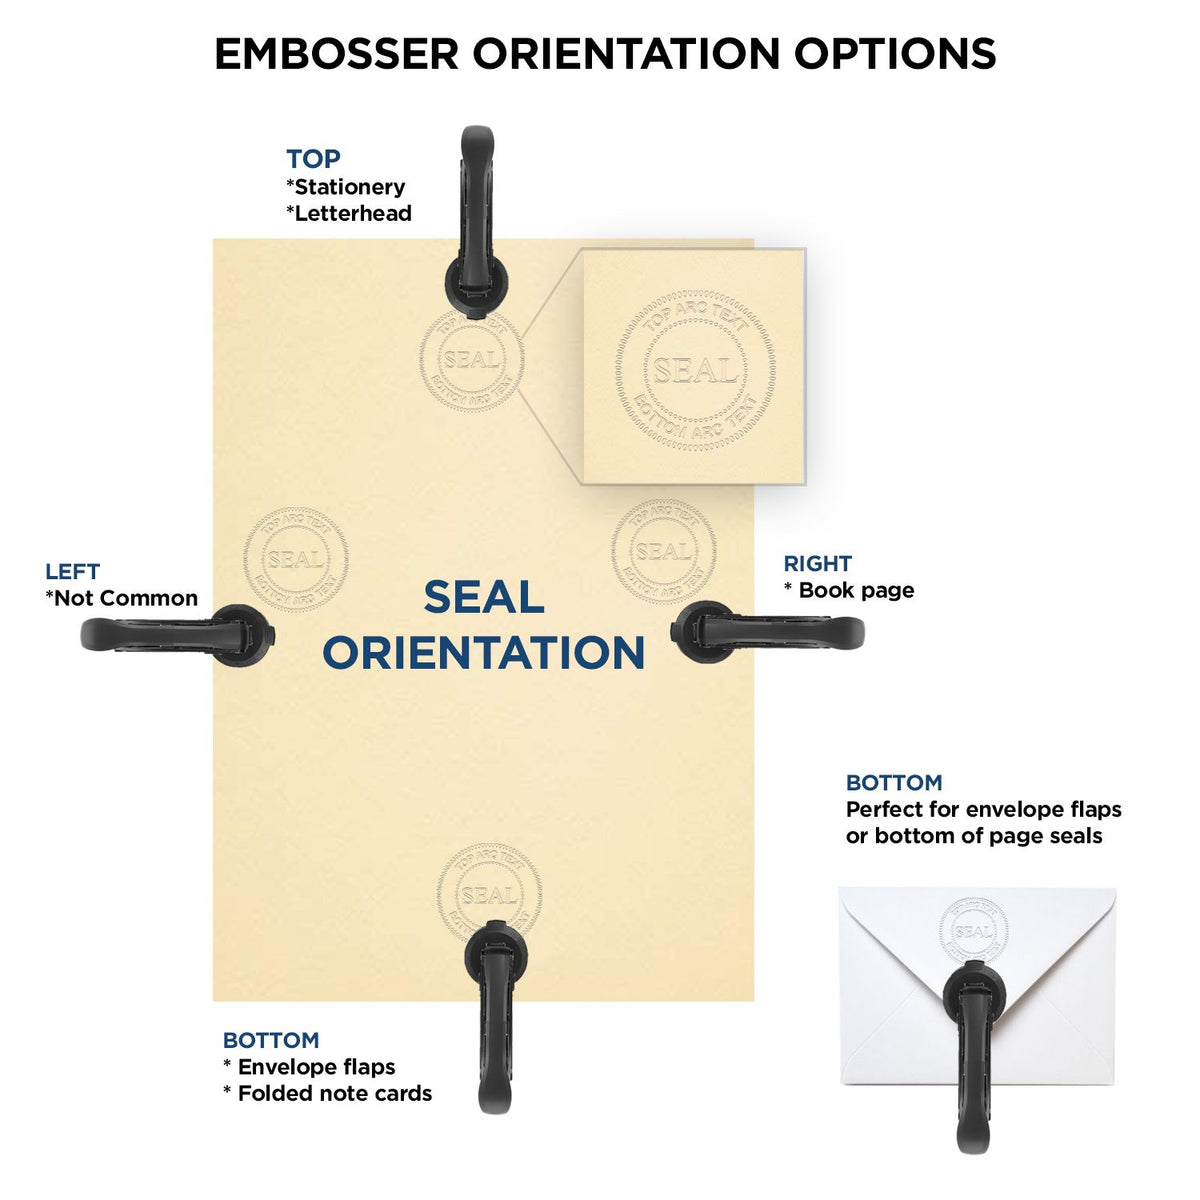 An infographic for the Gift Iowa Land Surveyor Seal showing embosser orientation, this is showing examples of a top, bottom, right and left insert.